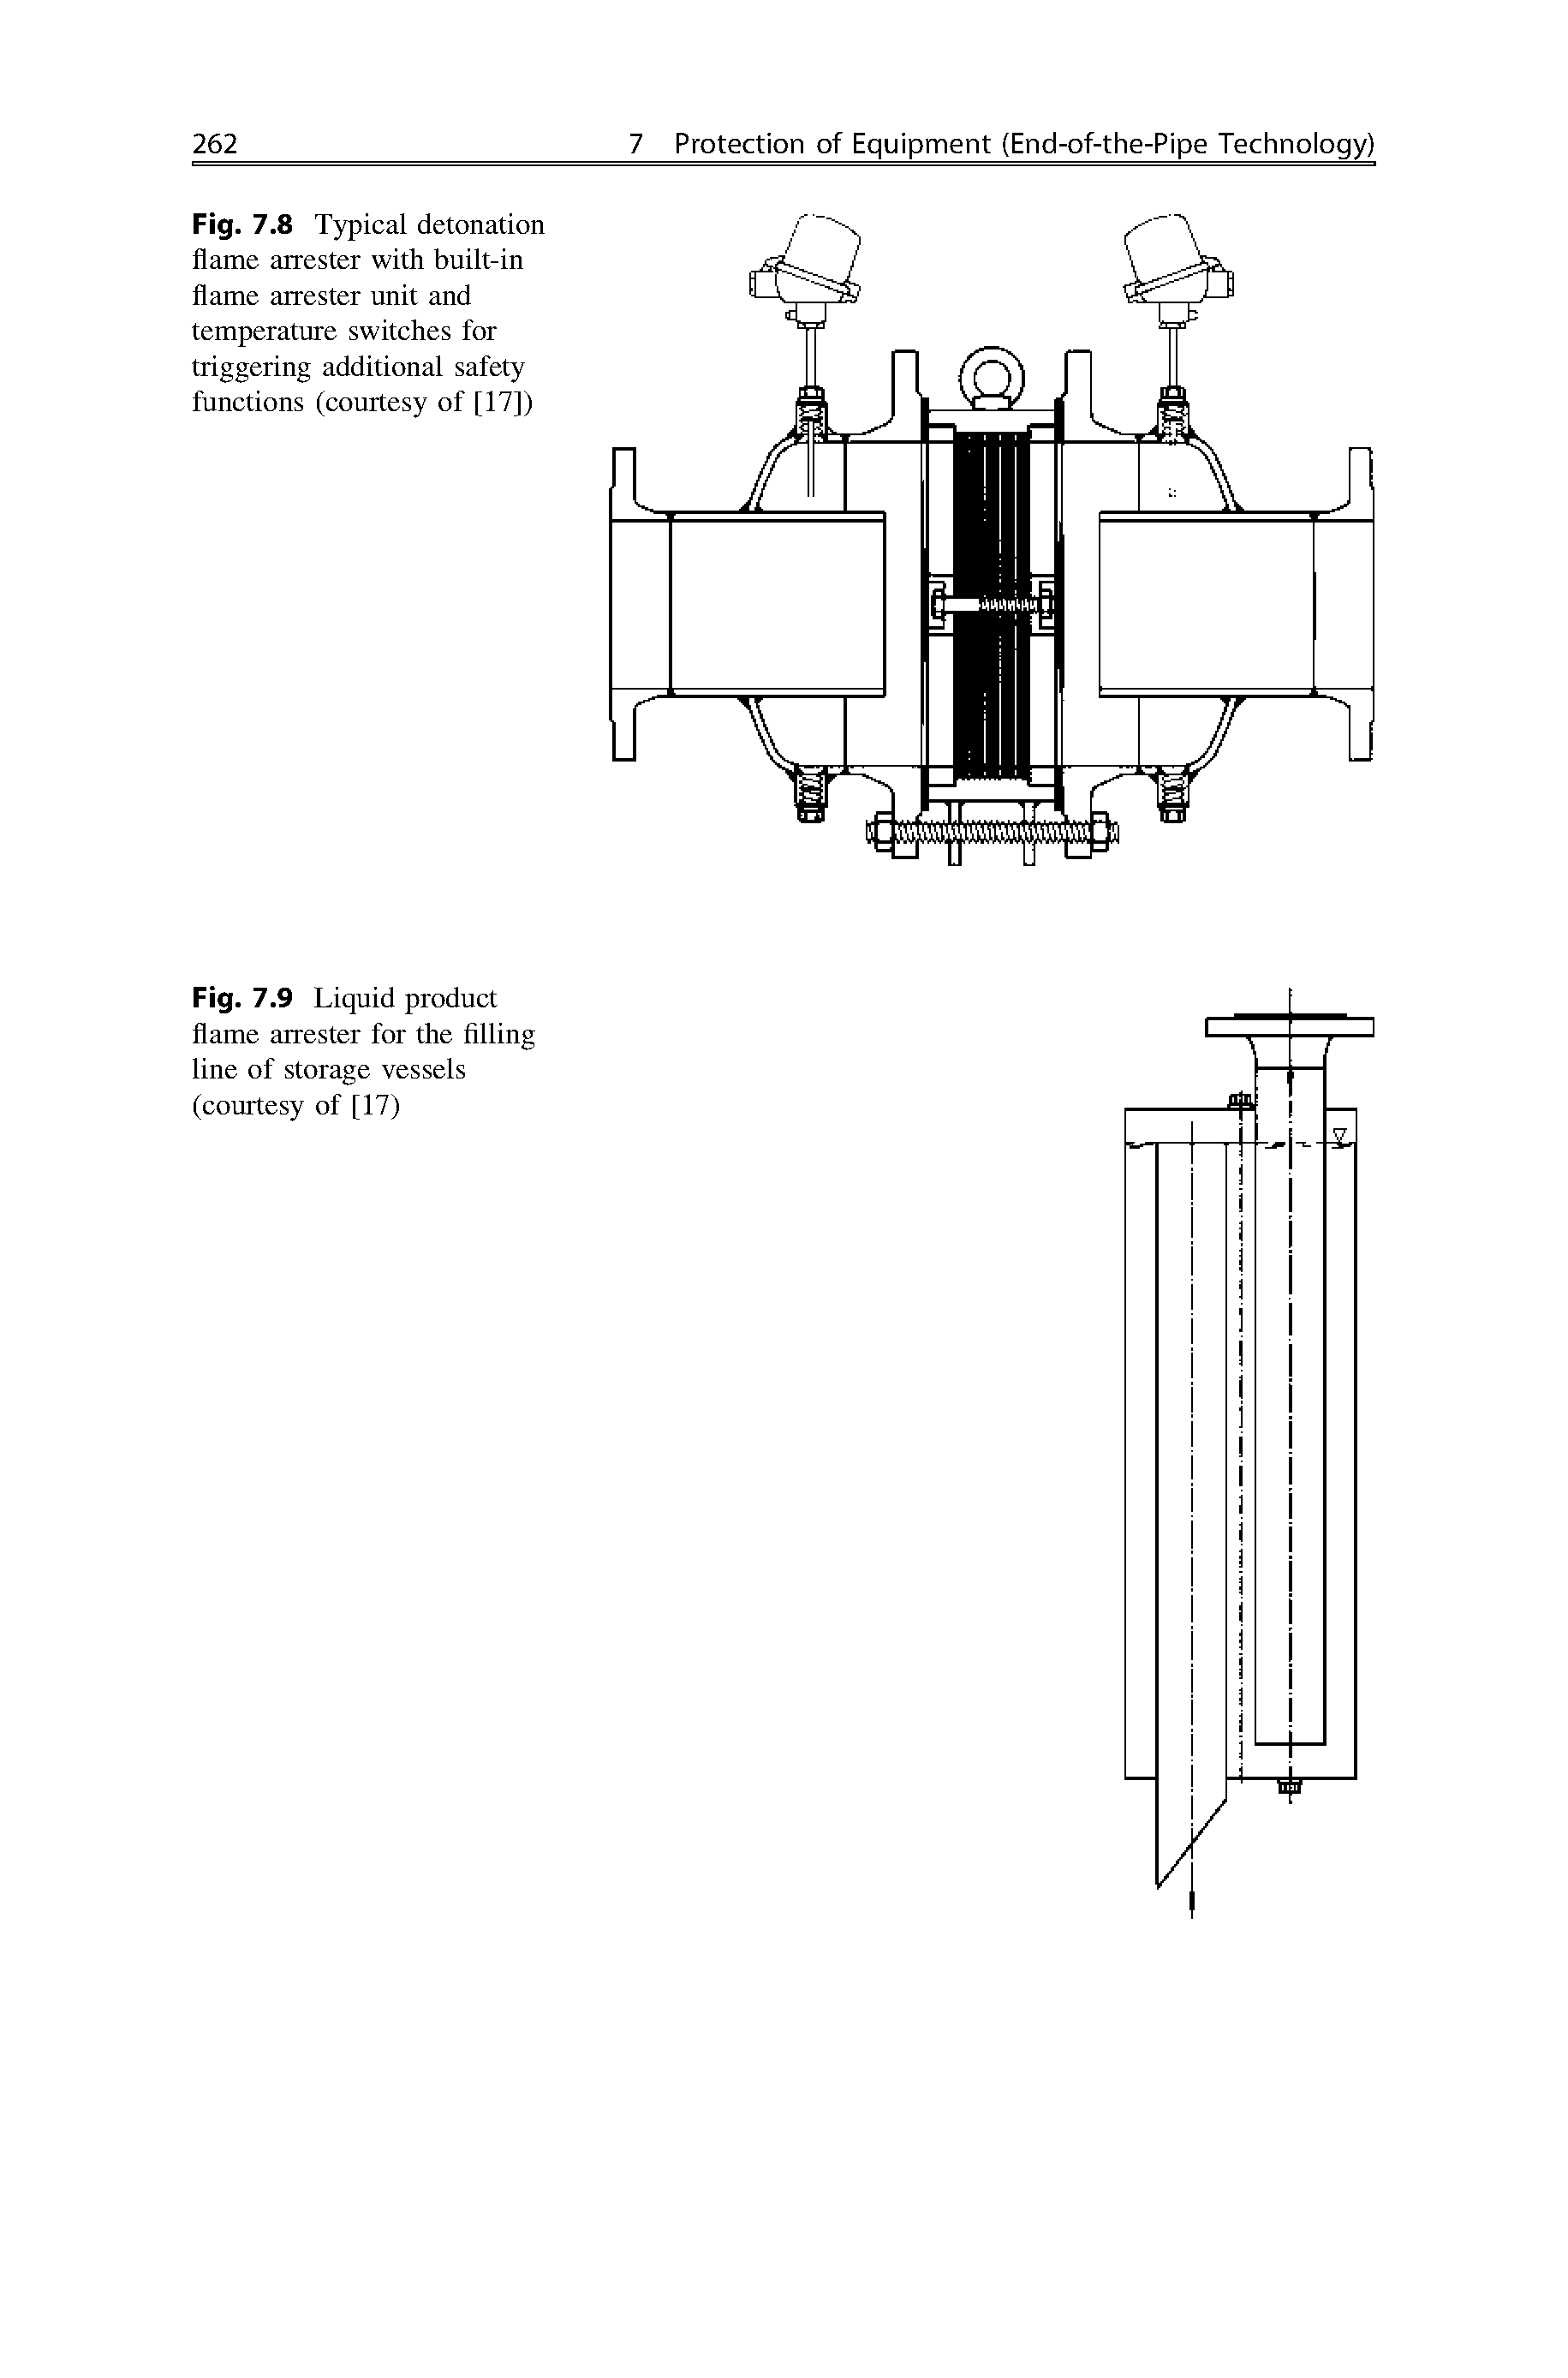 Fig. 7.8 Typical detonation flame arrester with built-in flame arrester unit and temperature switches for triggering additional safety functions (courtesy of [17])...